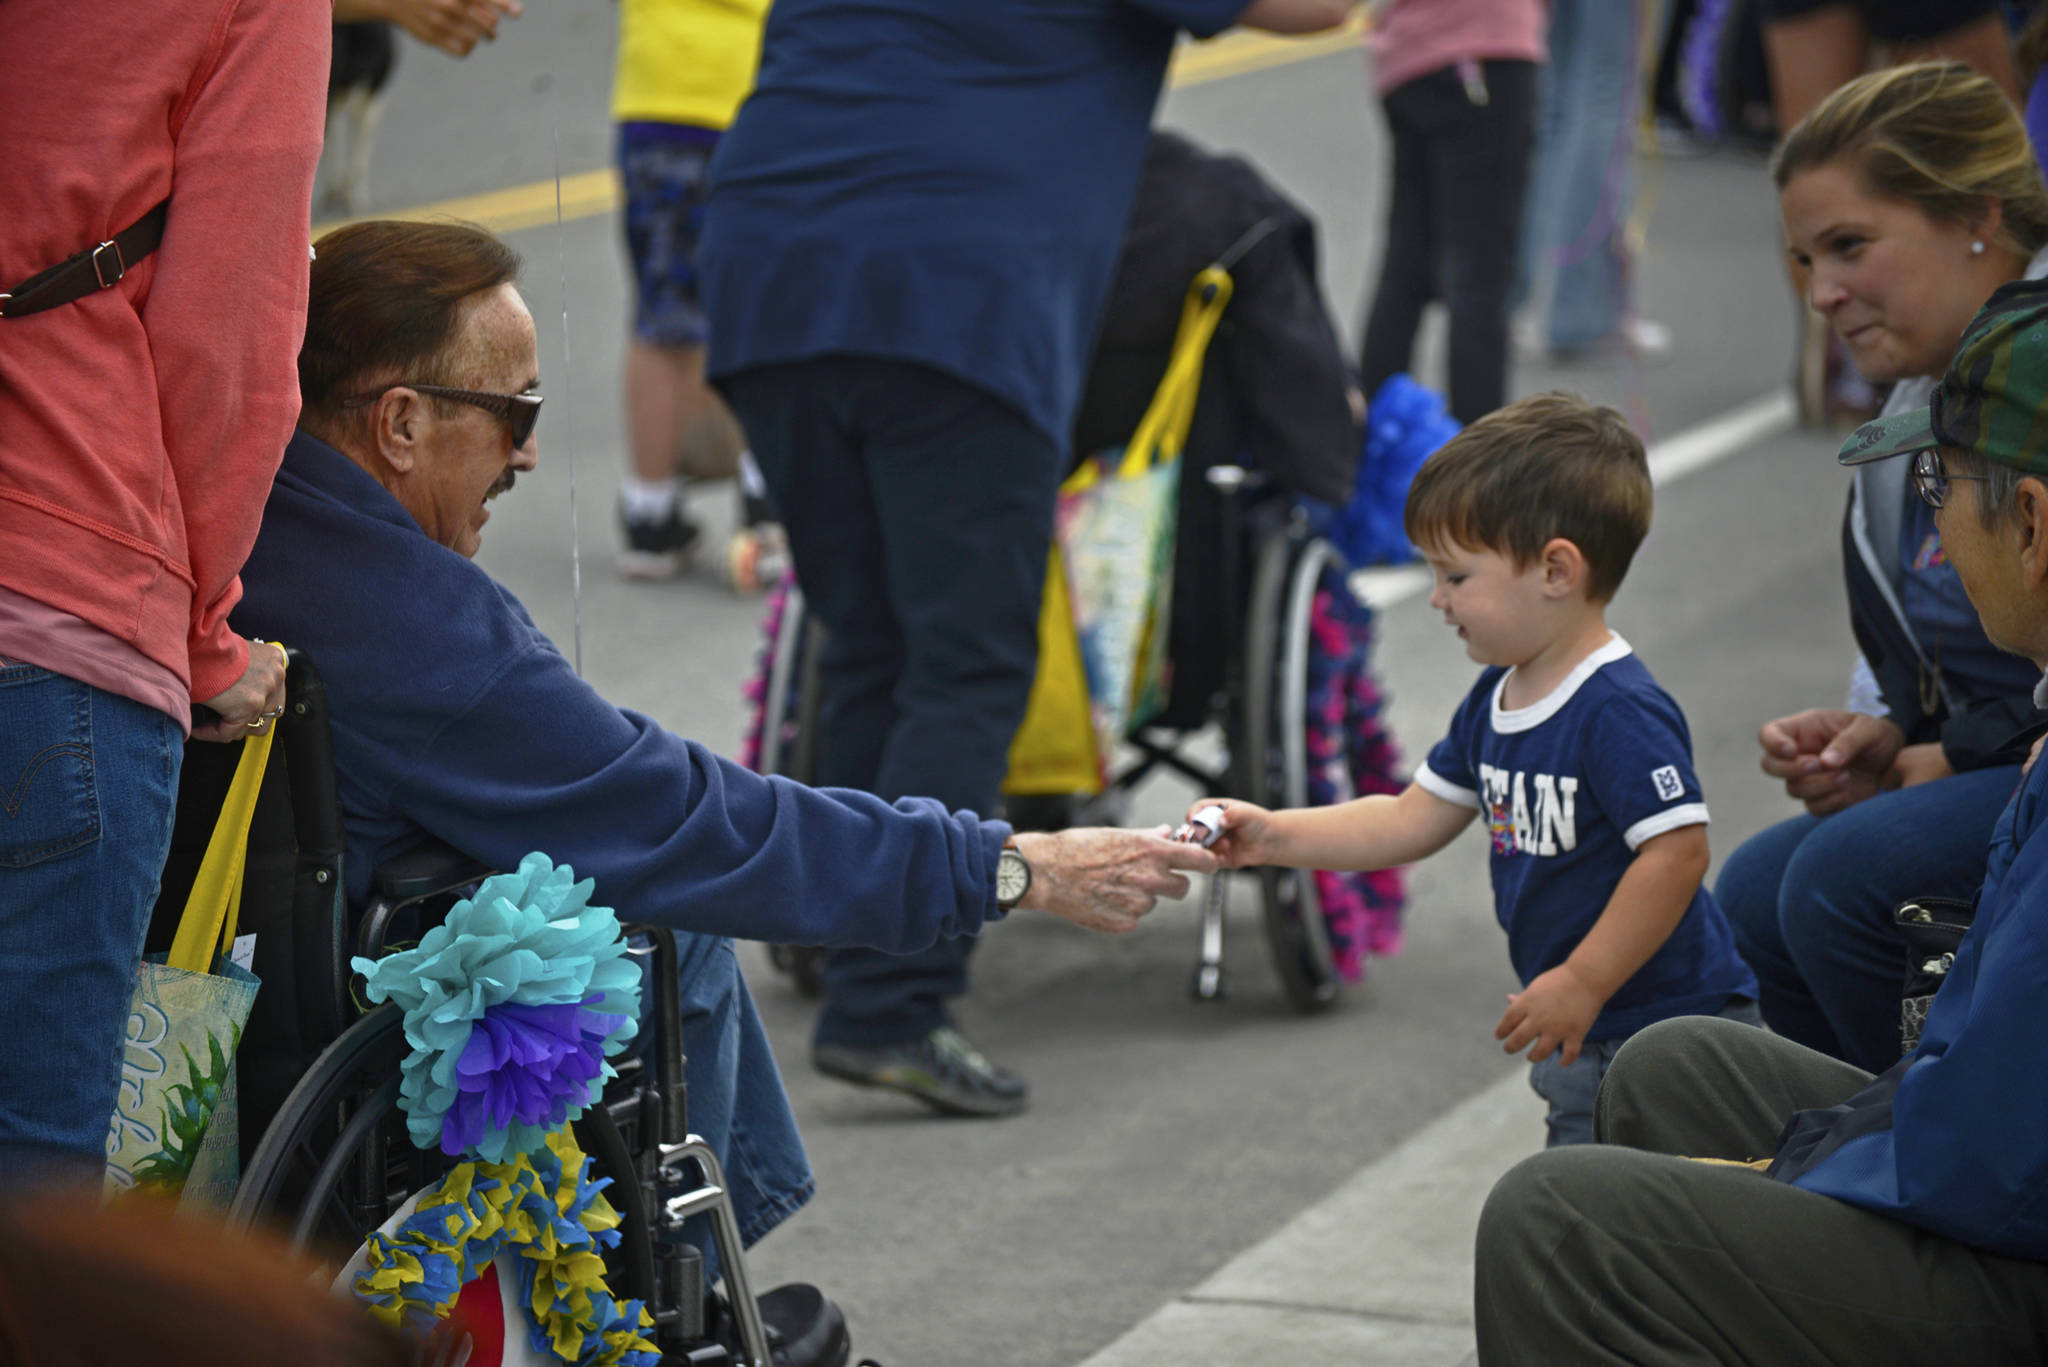 A participant in Heritage Place’s entry in the Progress Days parade hands a piece of candy to a young spectator as the group makes its way down Marydale Avenue on Saturday, July 28, 2018 in Soldotna, Alaska. The parade kicks off the weekend-long event celebrating Soldotna’s history, with a market on Saturday and Sunday in Soldotna Creek Park and a concert Saturday night followed by a free community barbecue Sunday. (Photo by Elizabeth Earl/Peninsula Clarion)